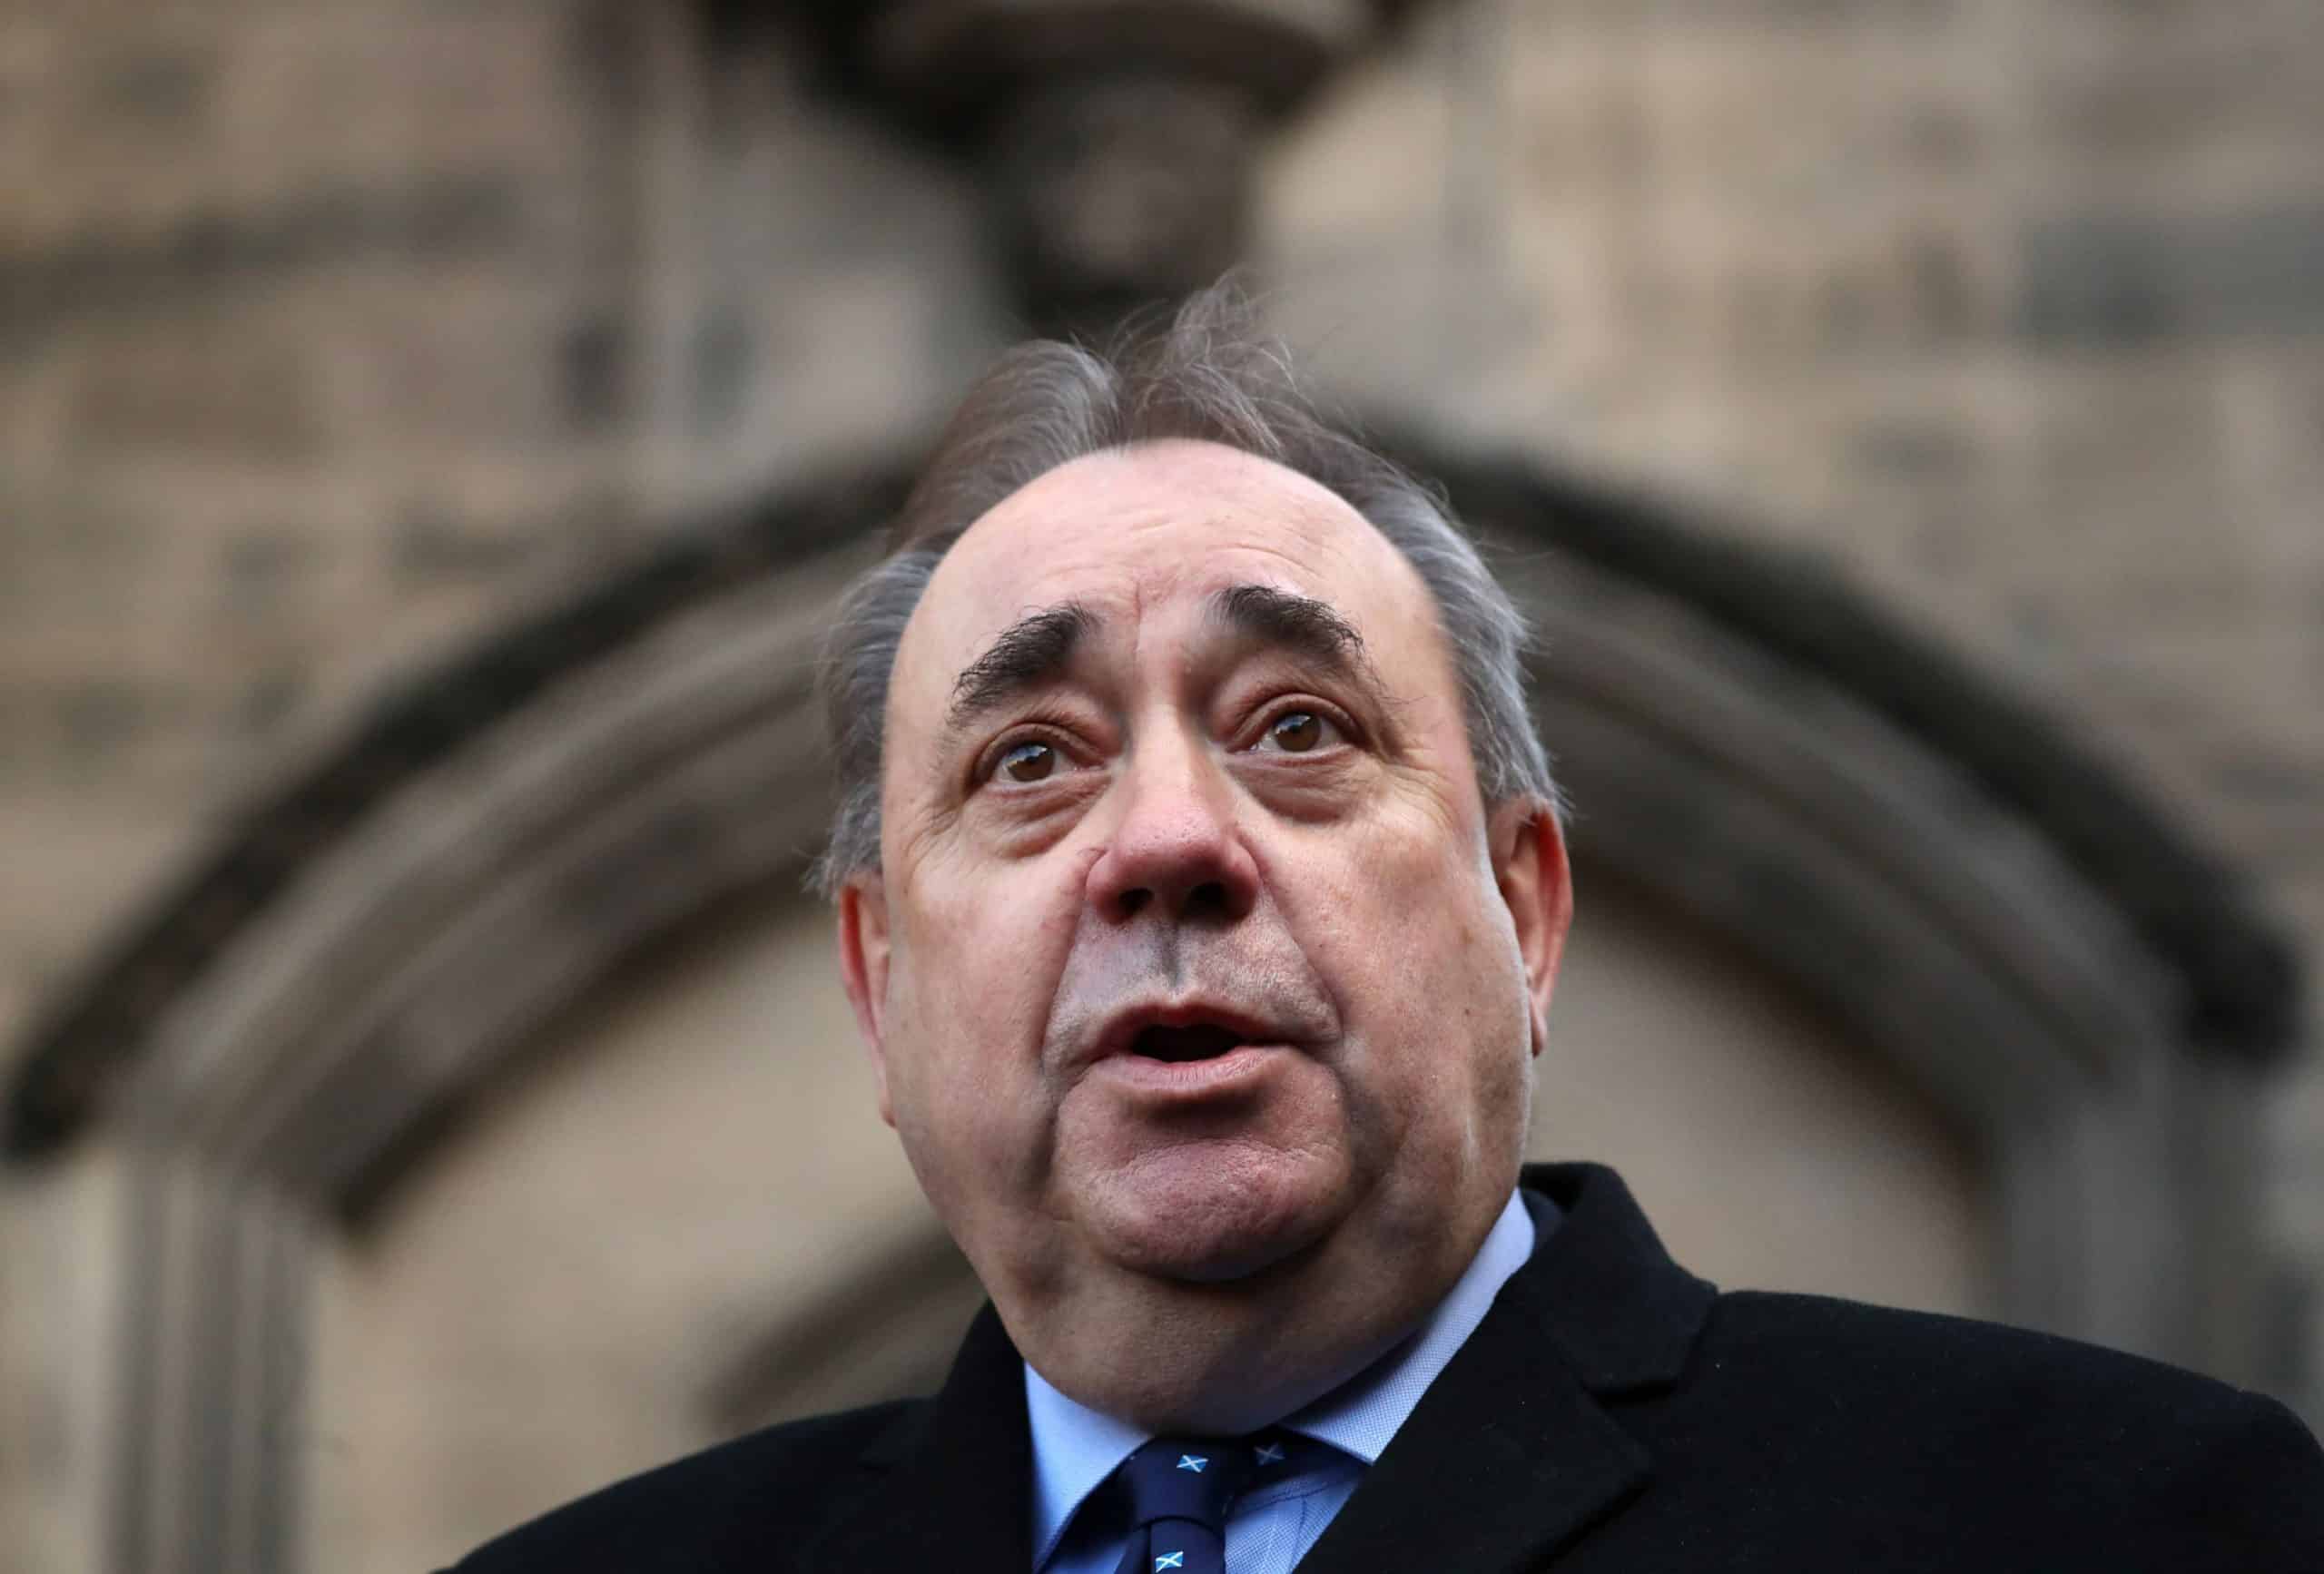 Alex Salmond launches new party targeting independence ‘super-majority’